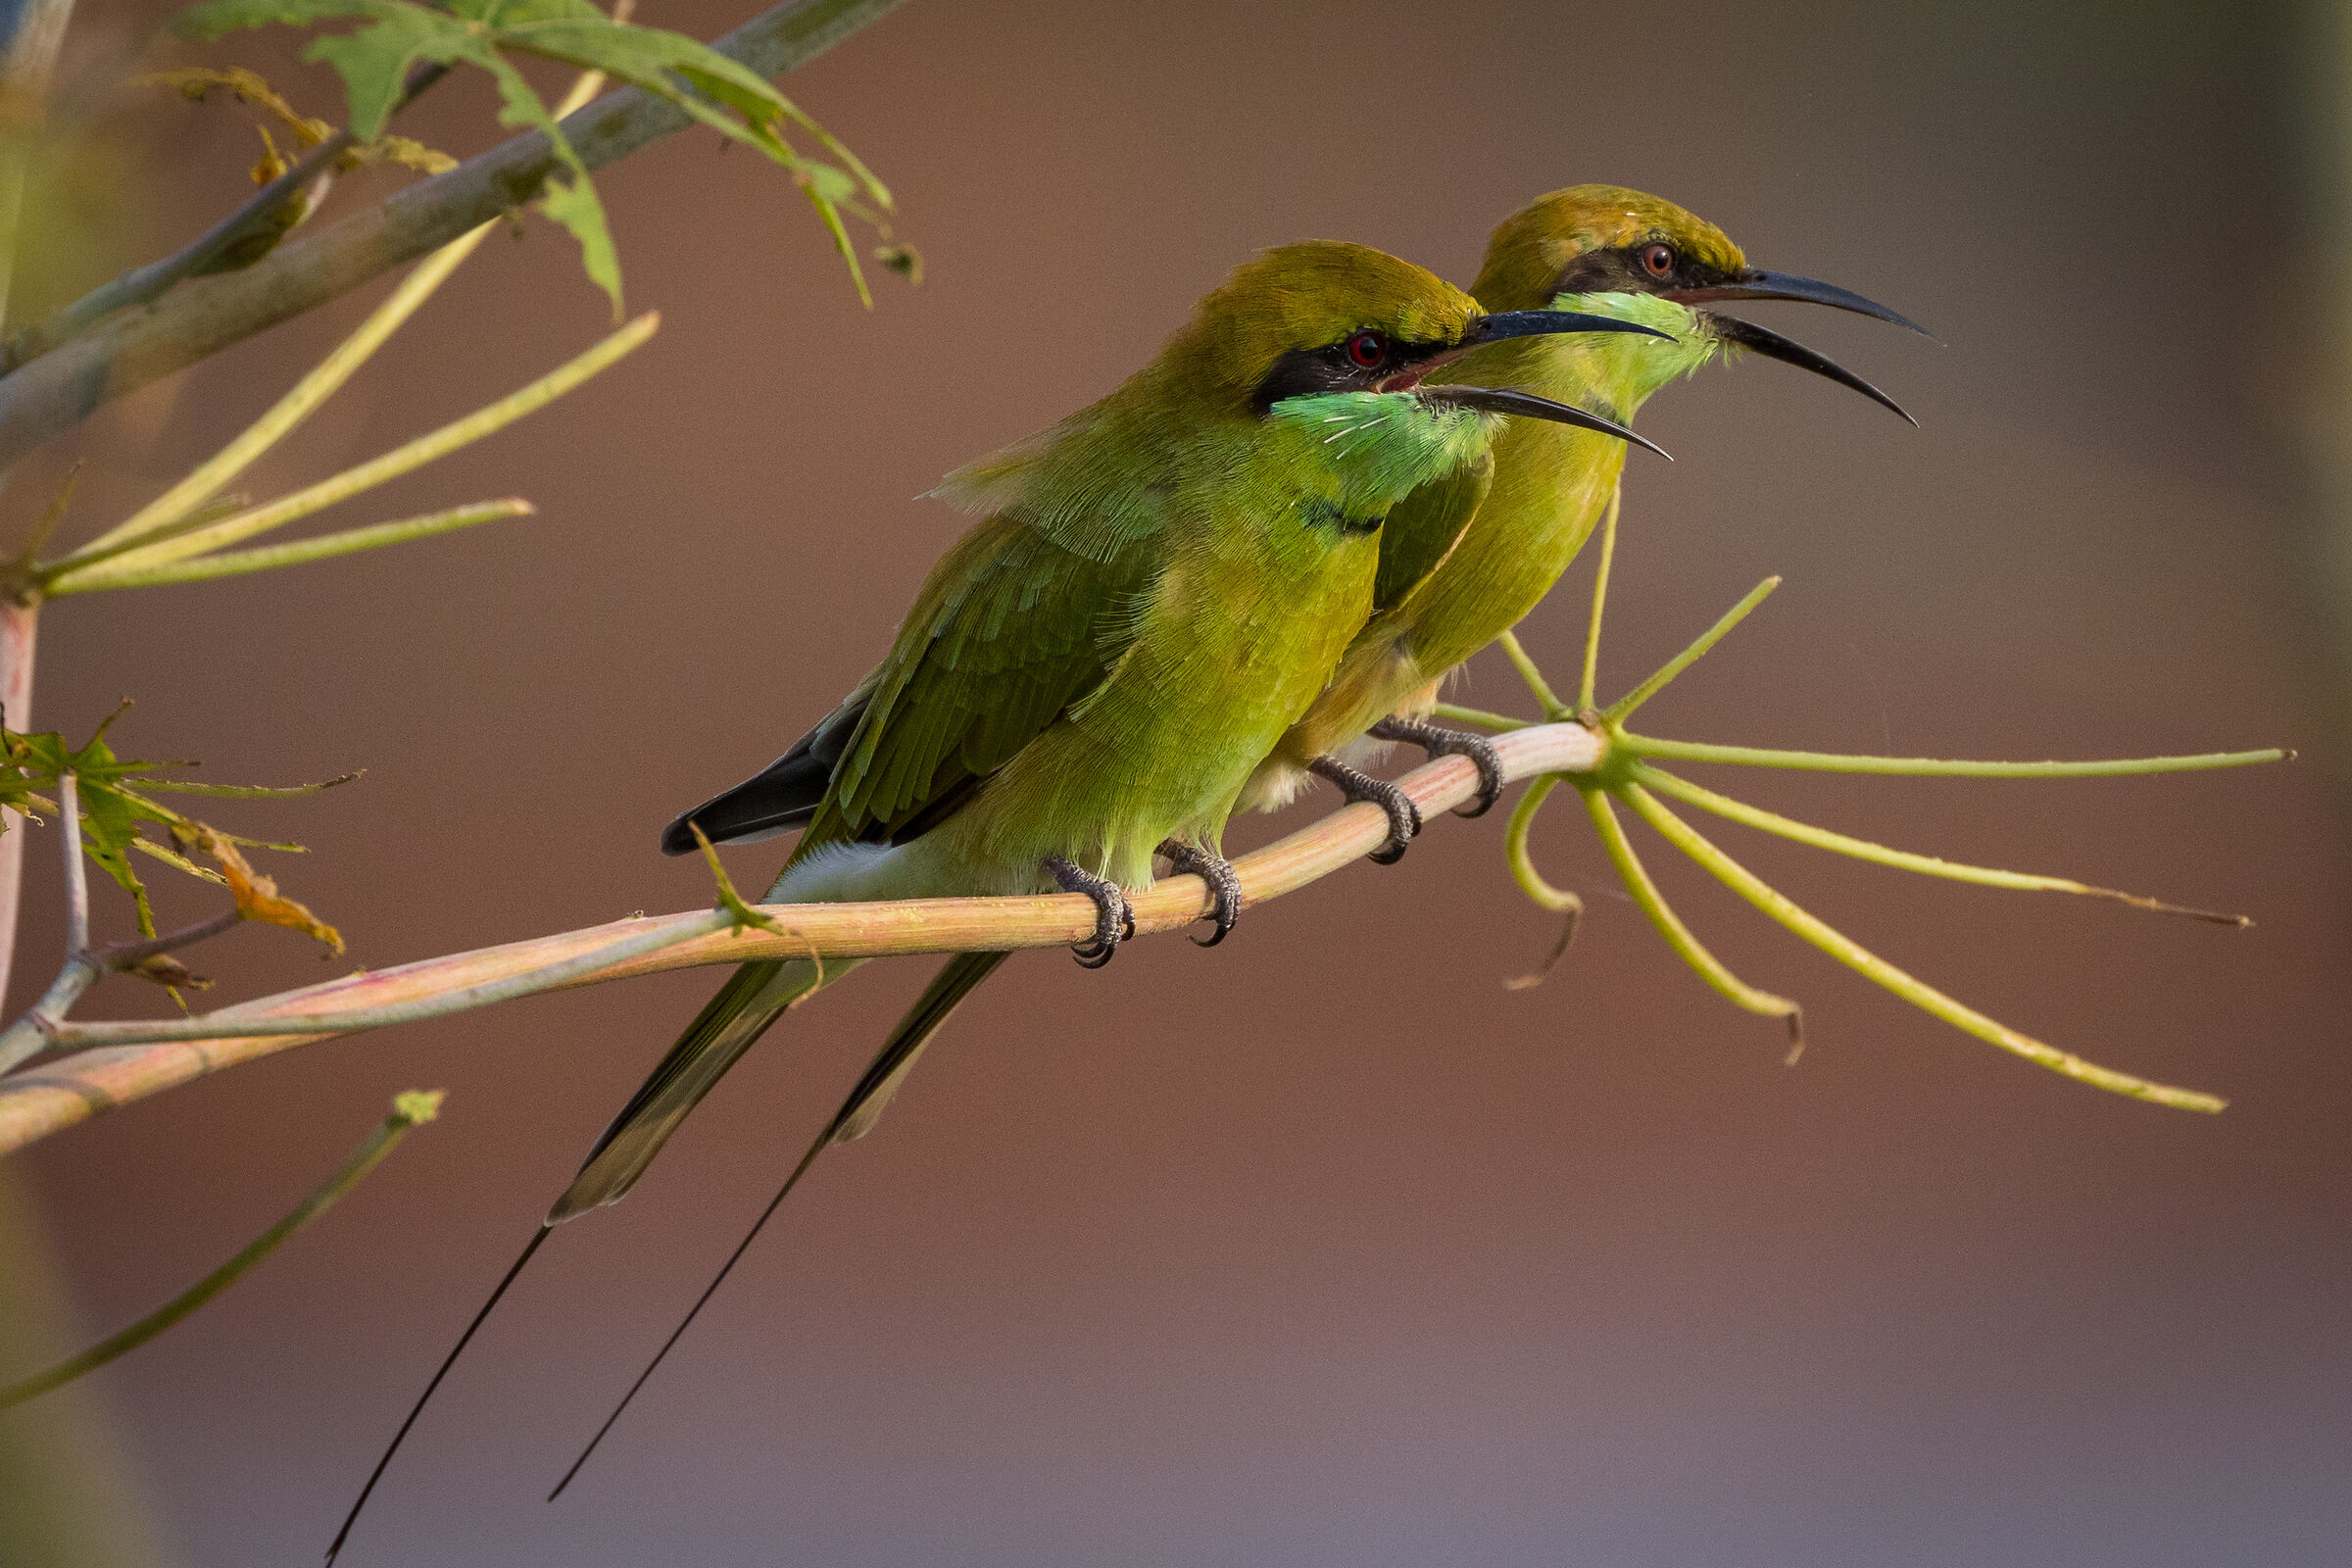 Couple of Bee Eaters...